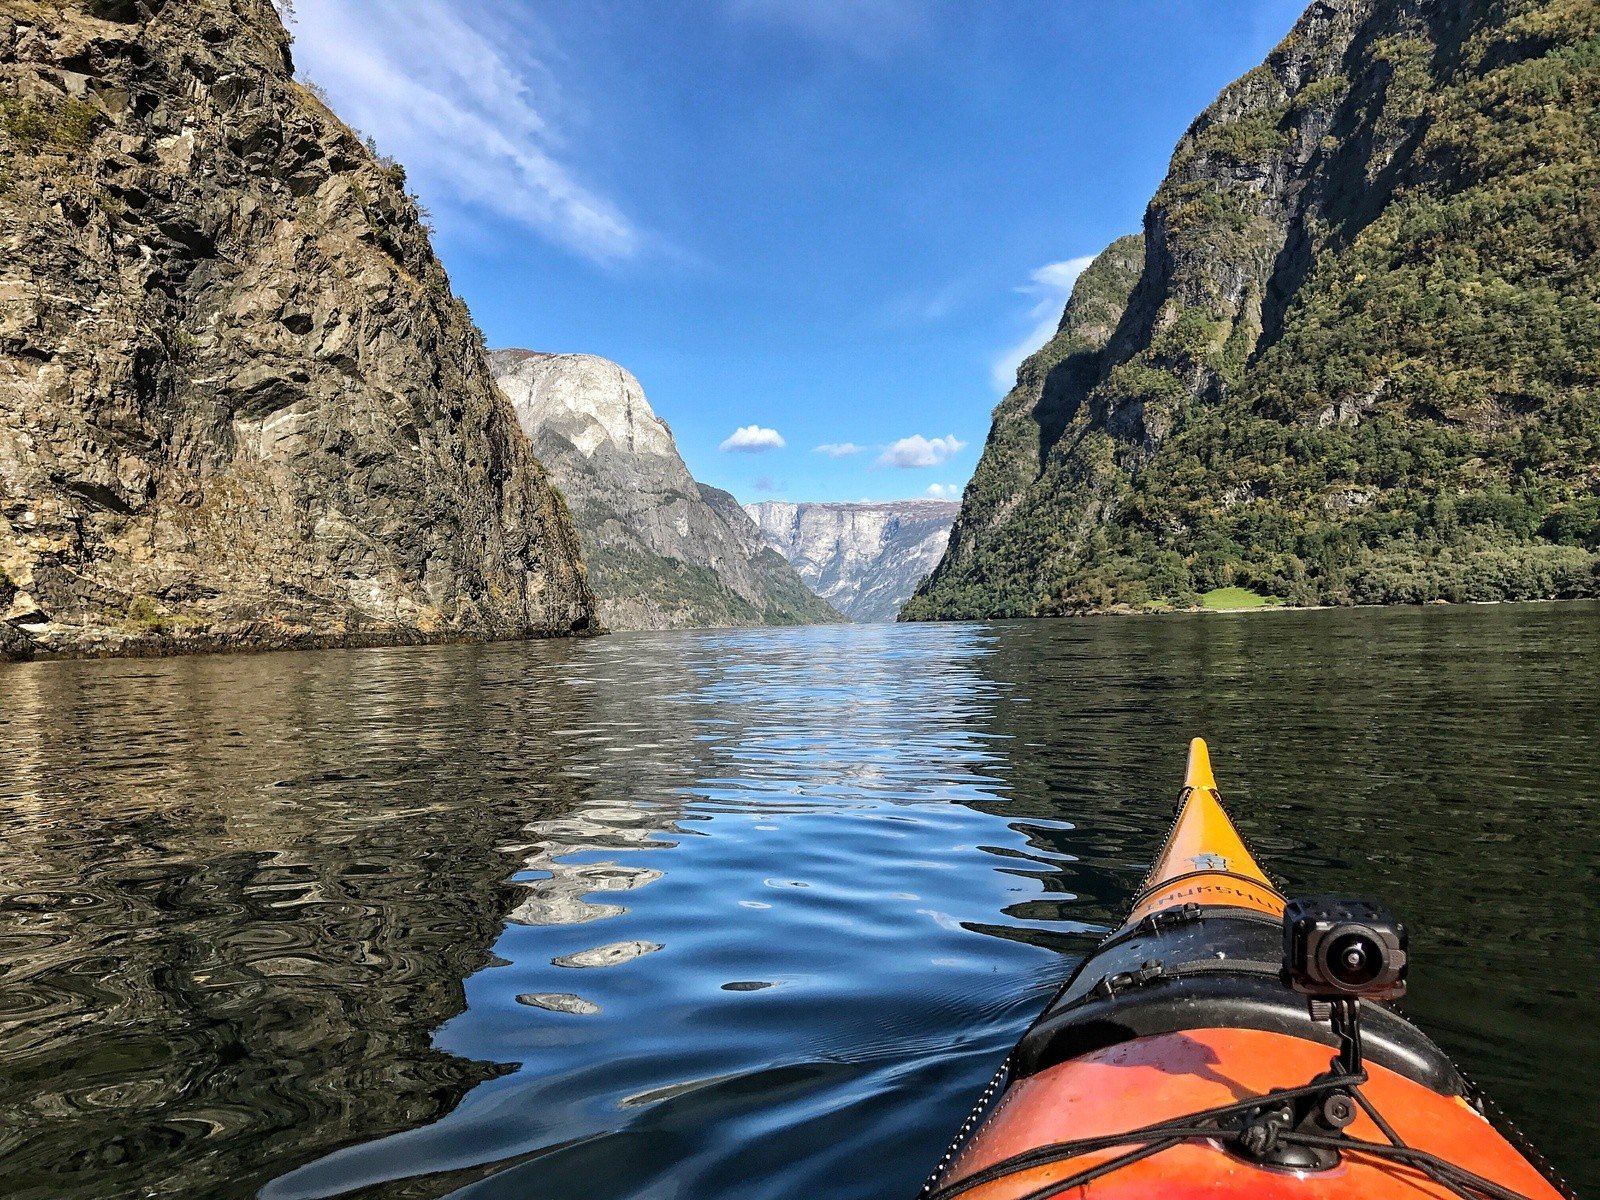 The front of a kayak gliding across the Norwegian fjords.